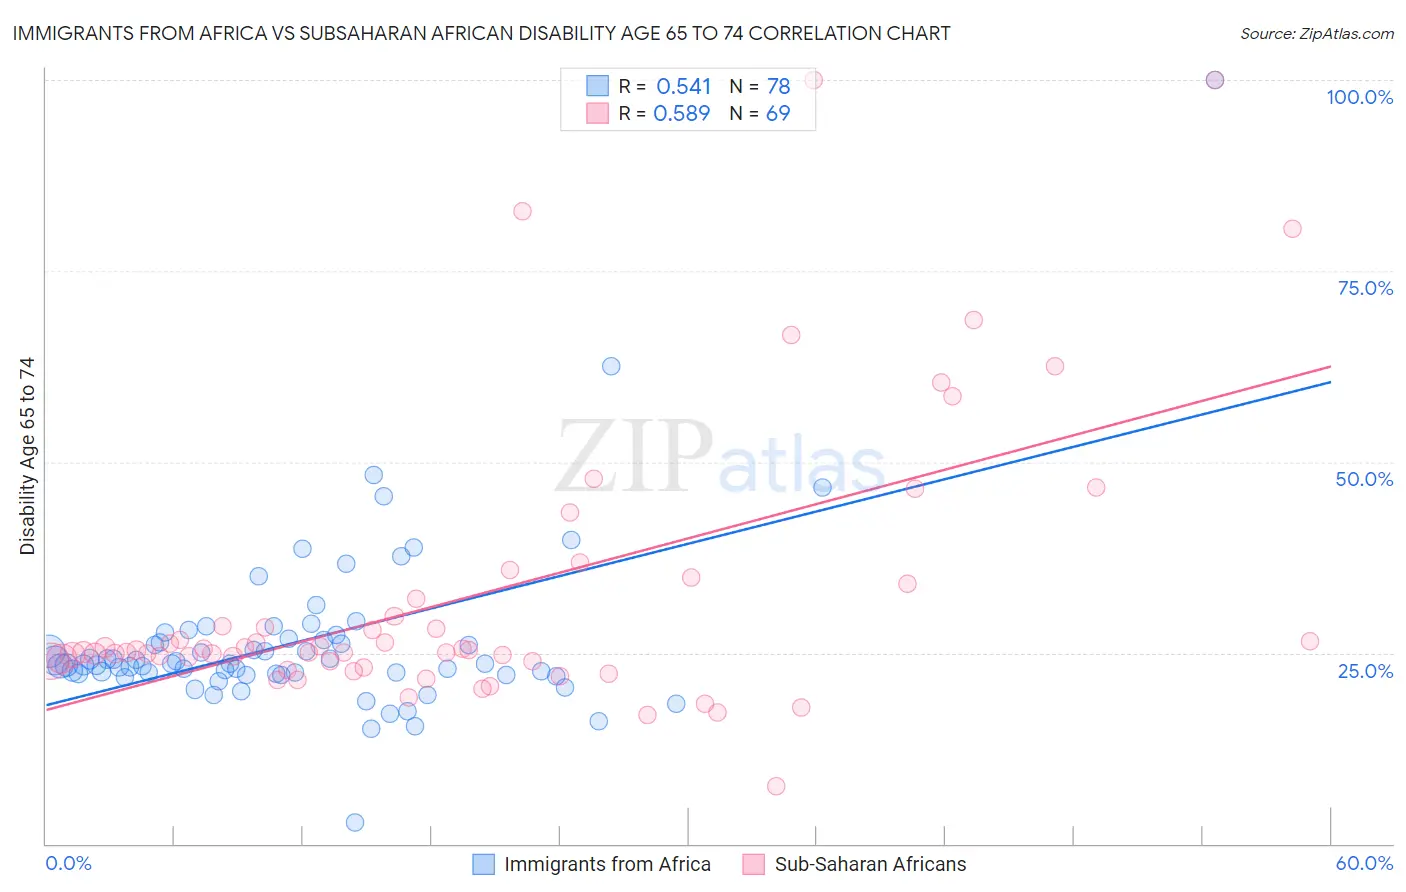 Immigrants from Africa vs Subsaharan African Disability Age 65 to 74